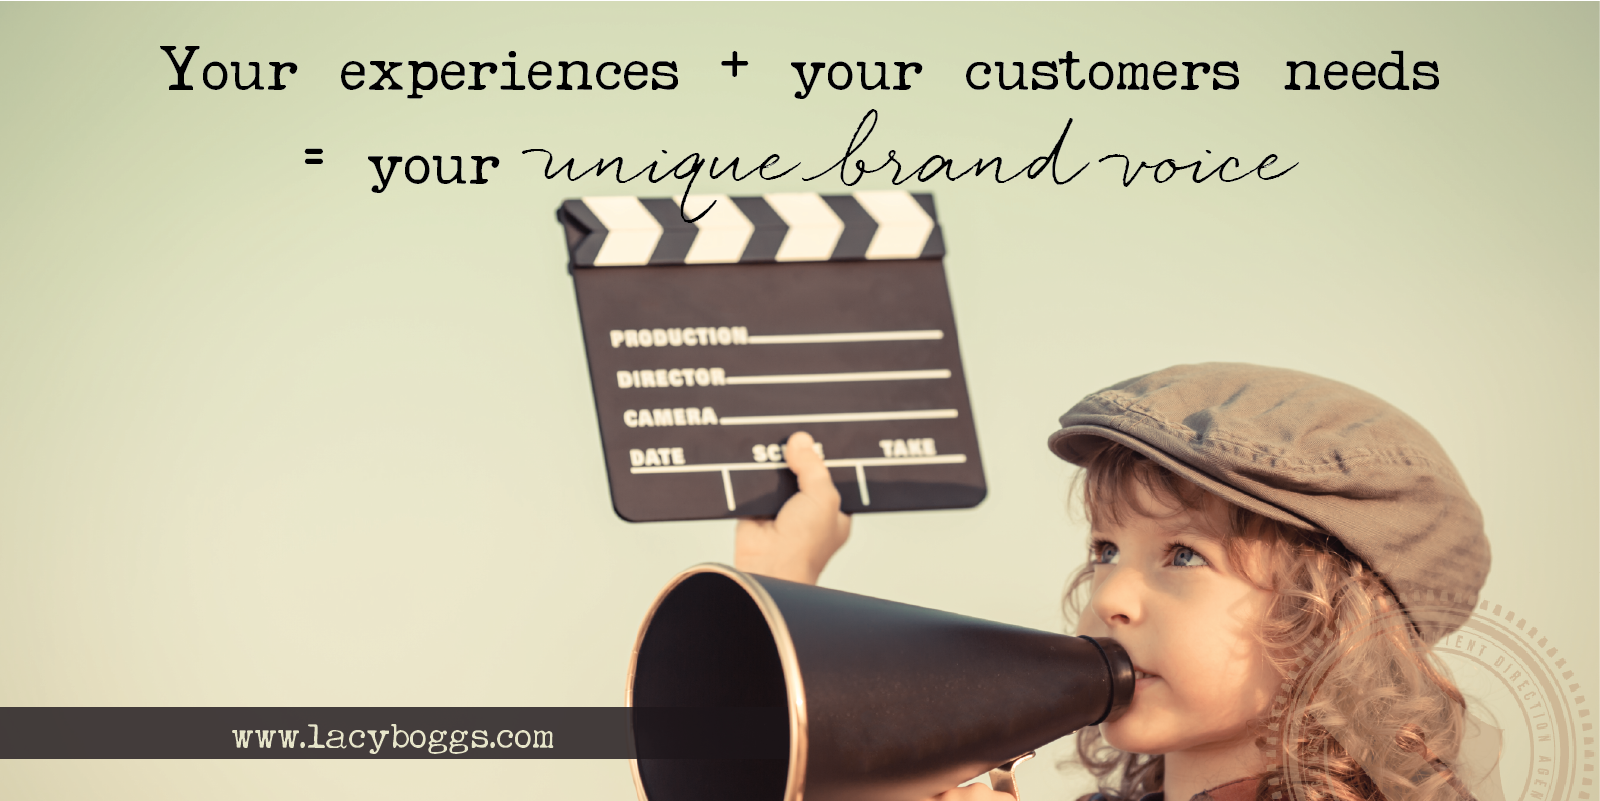 Your experiences + your customers' needs = your unique brand voice.